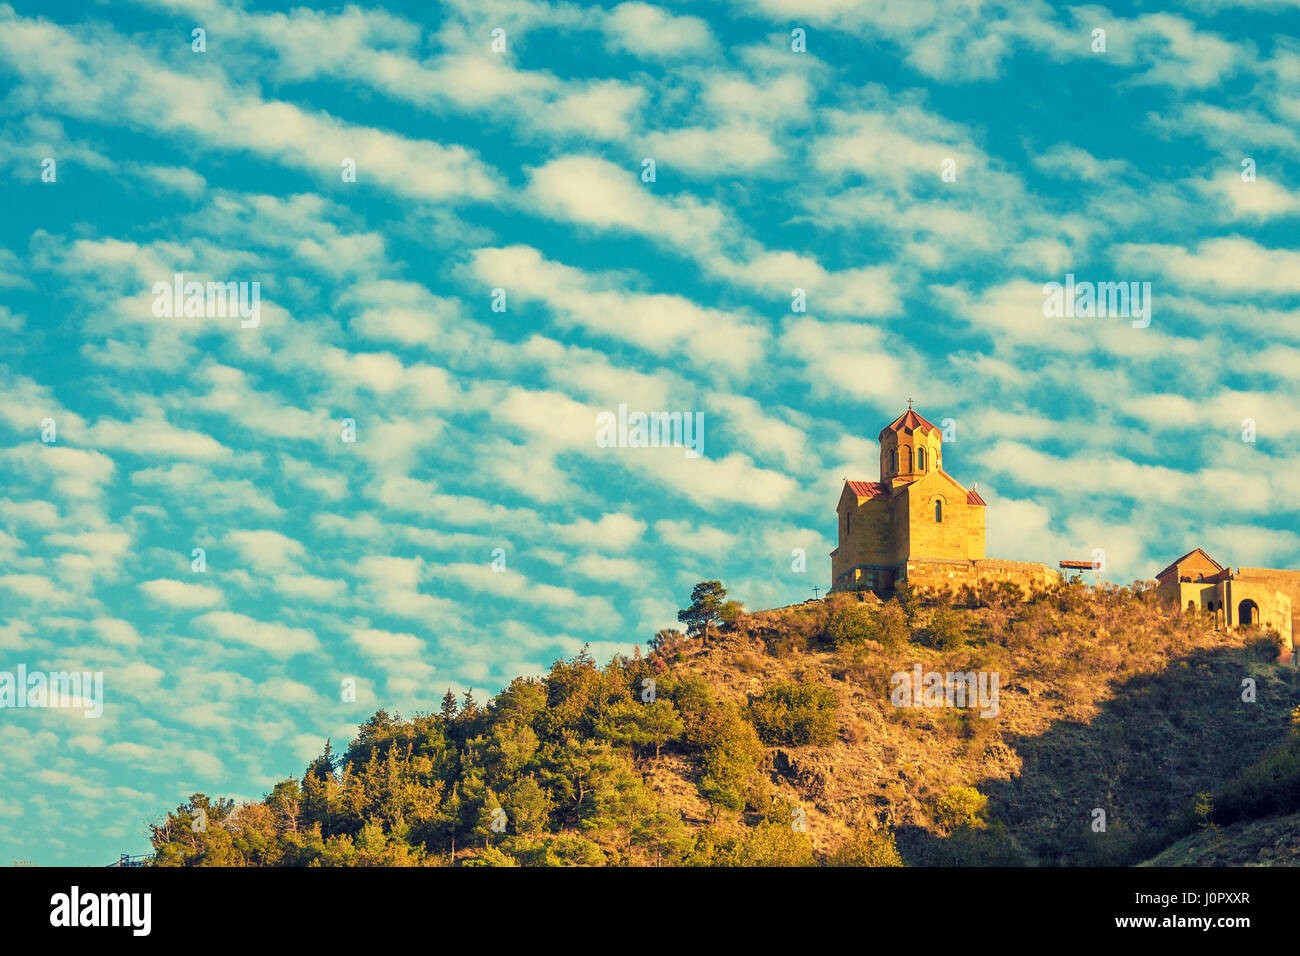 Thabori monastery on a hill with rainbow behind in Tbilisi, Georgia country Stock Photo